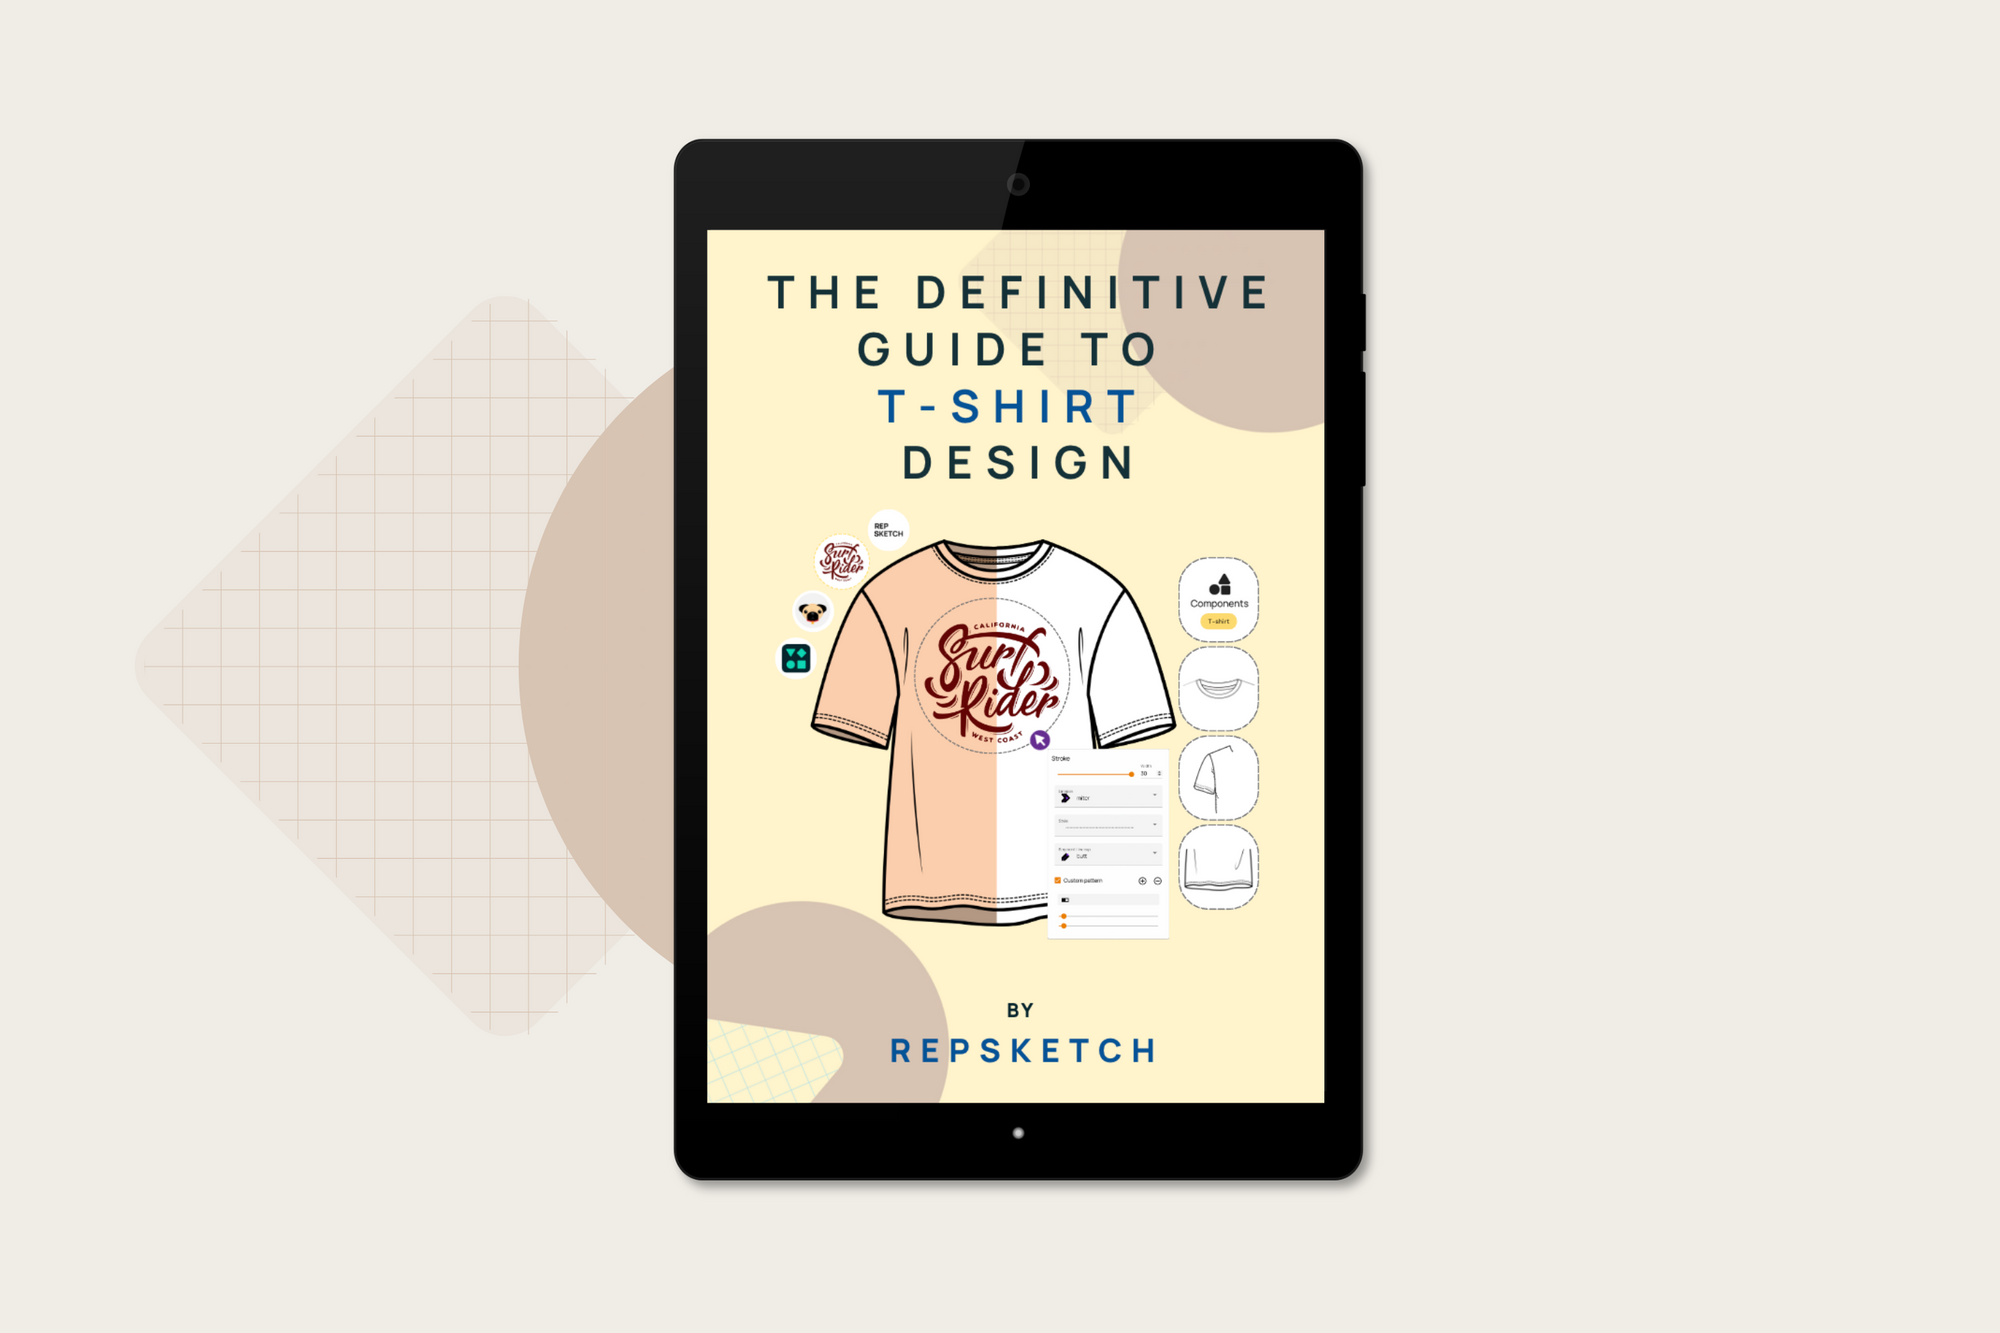 Ebook: The Definitive Guide to T-shirt Design